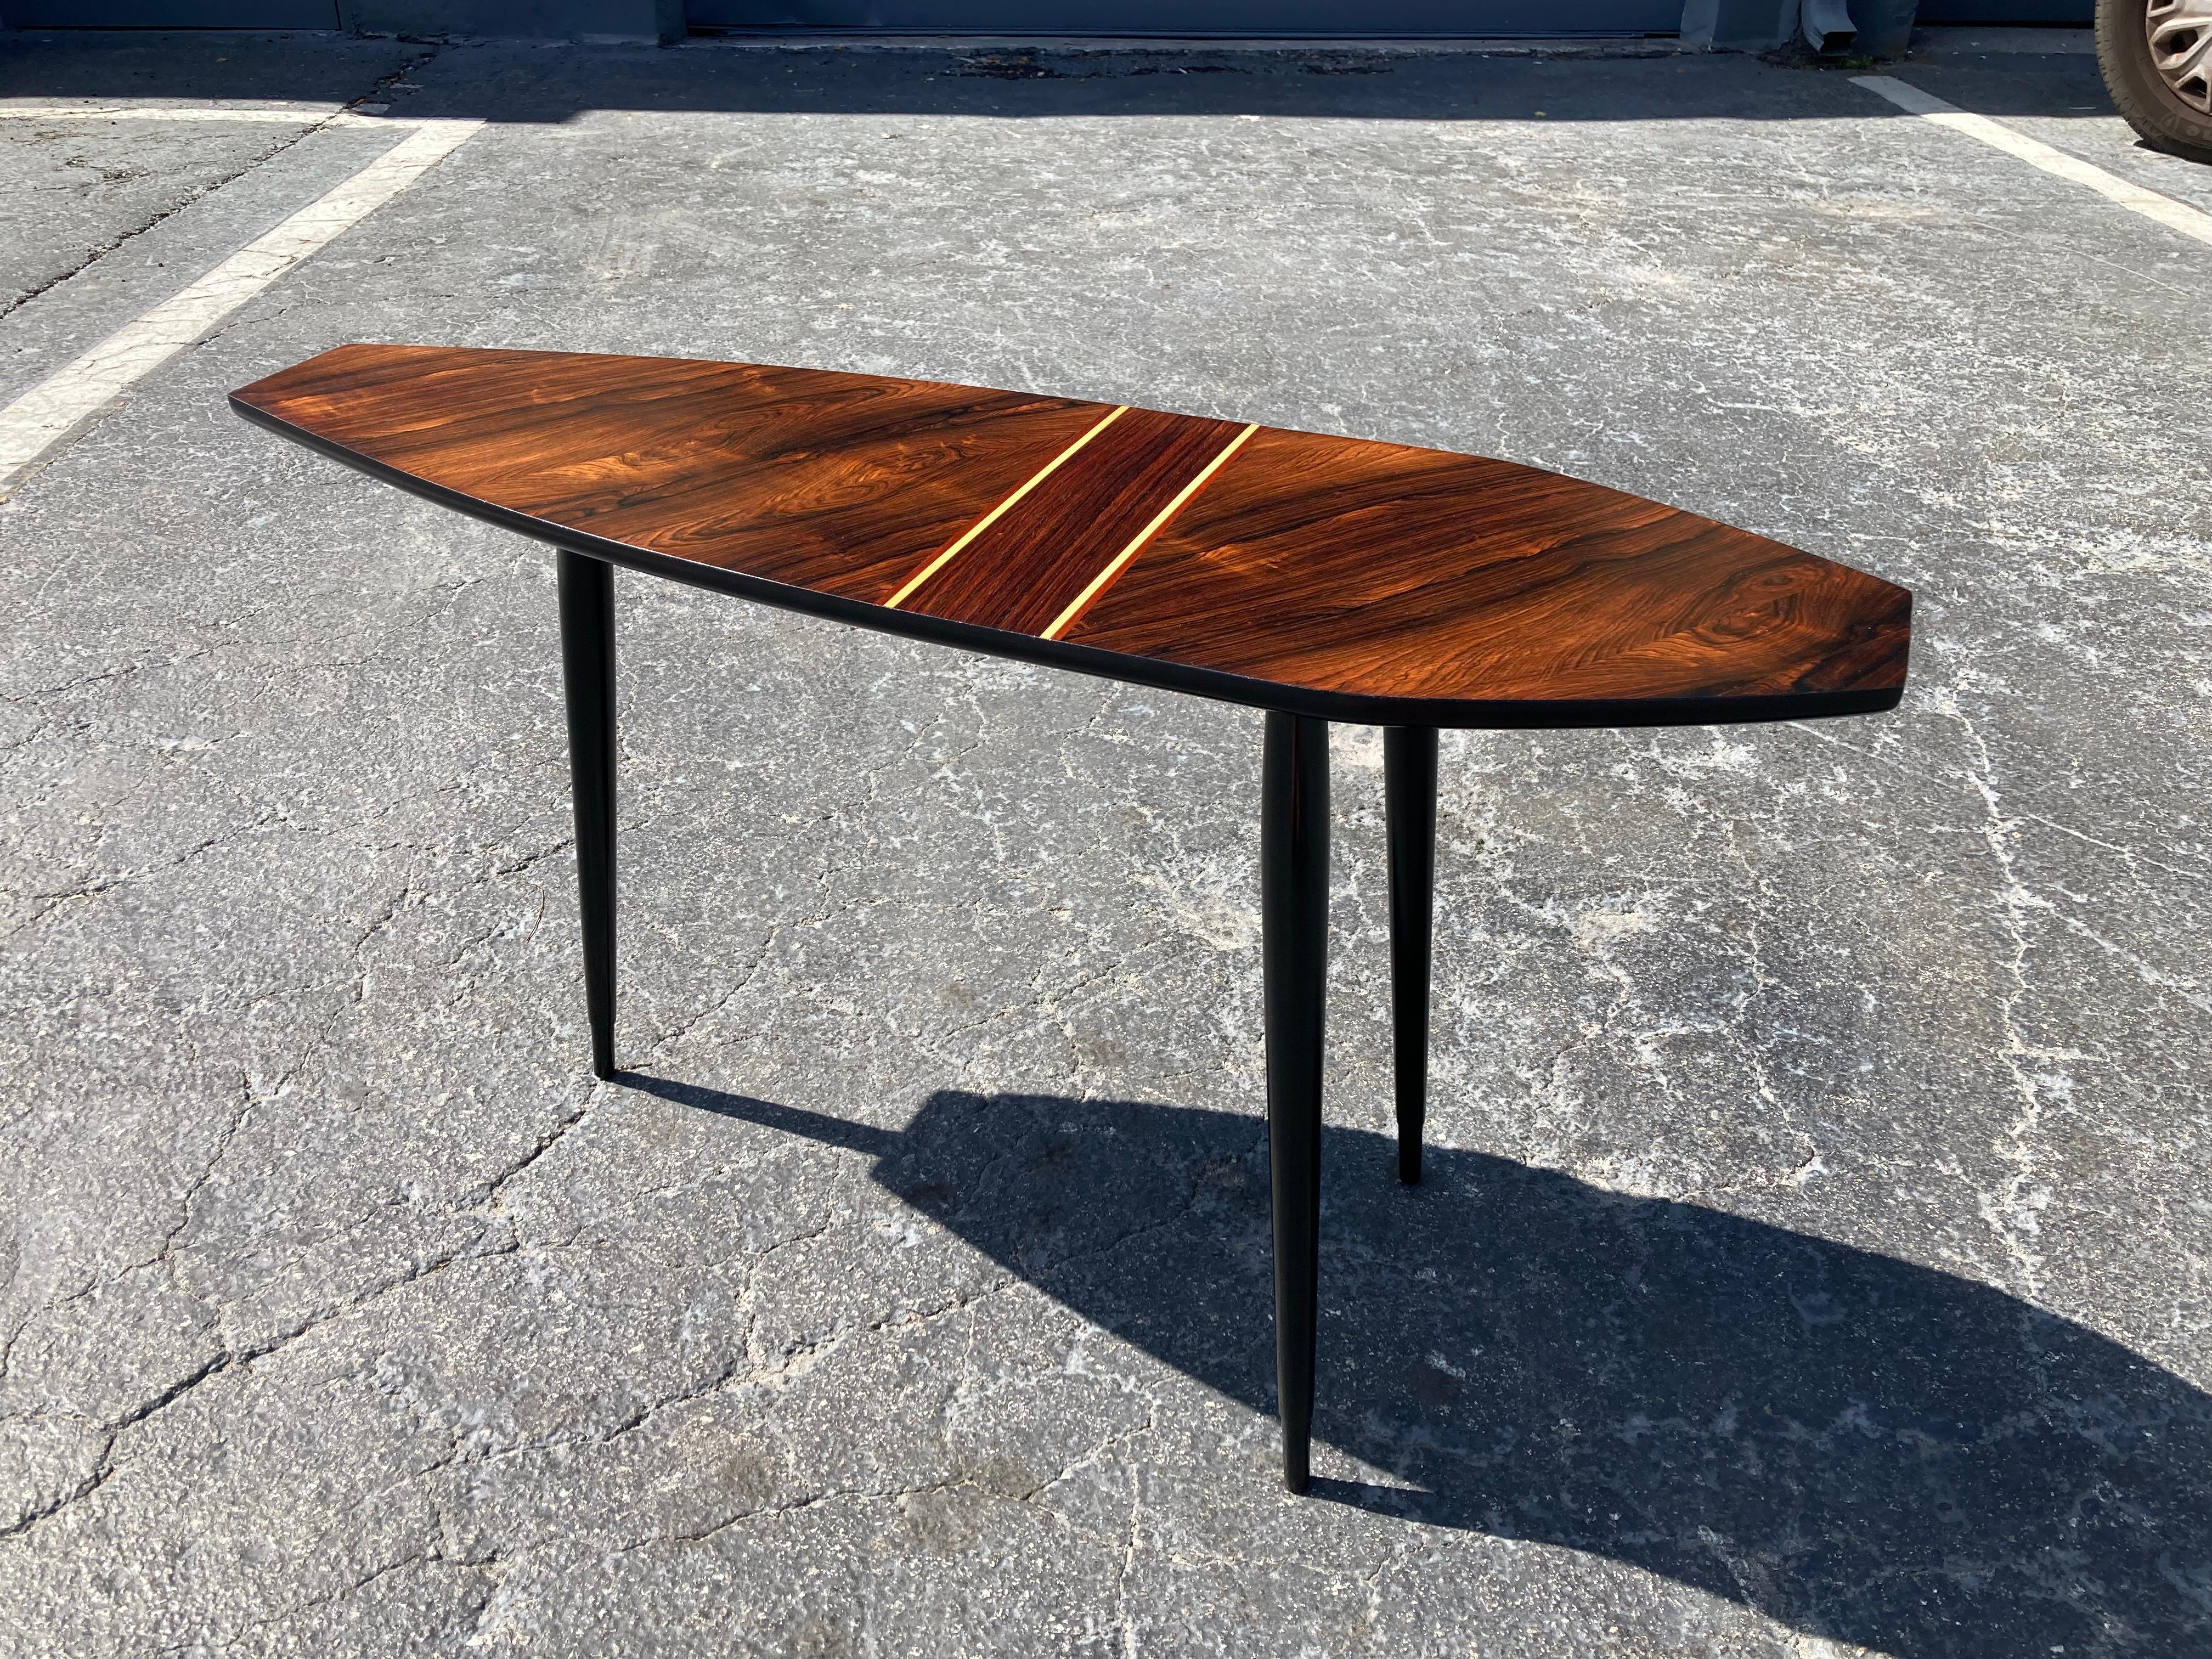 Beautiful side table made by Bröderna Miller in Sweden, most likely from the 1960s. The three black legs unscrew. Table top in rosewood and other veneer. Please see pictures. Ready for a new home.